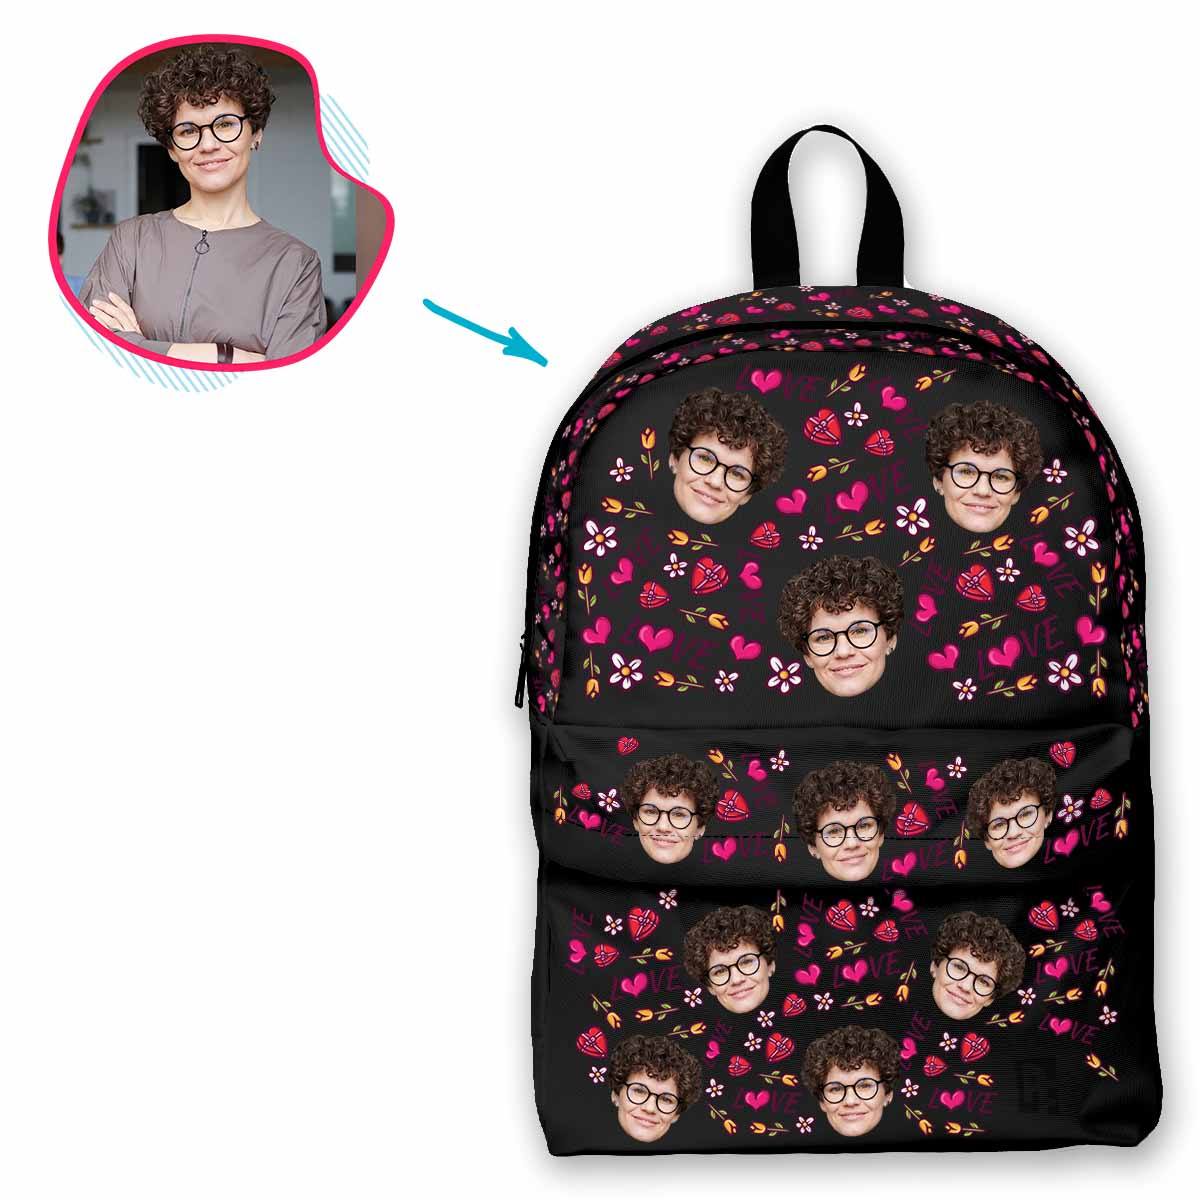 dark Hearts and Flowers classic backpack personalized with photo of face printed on it